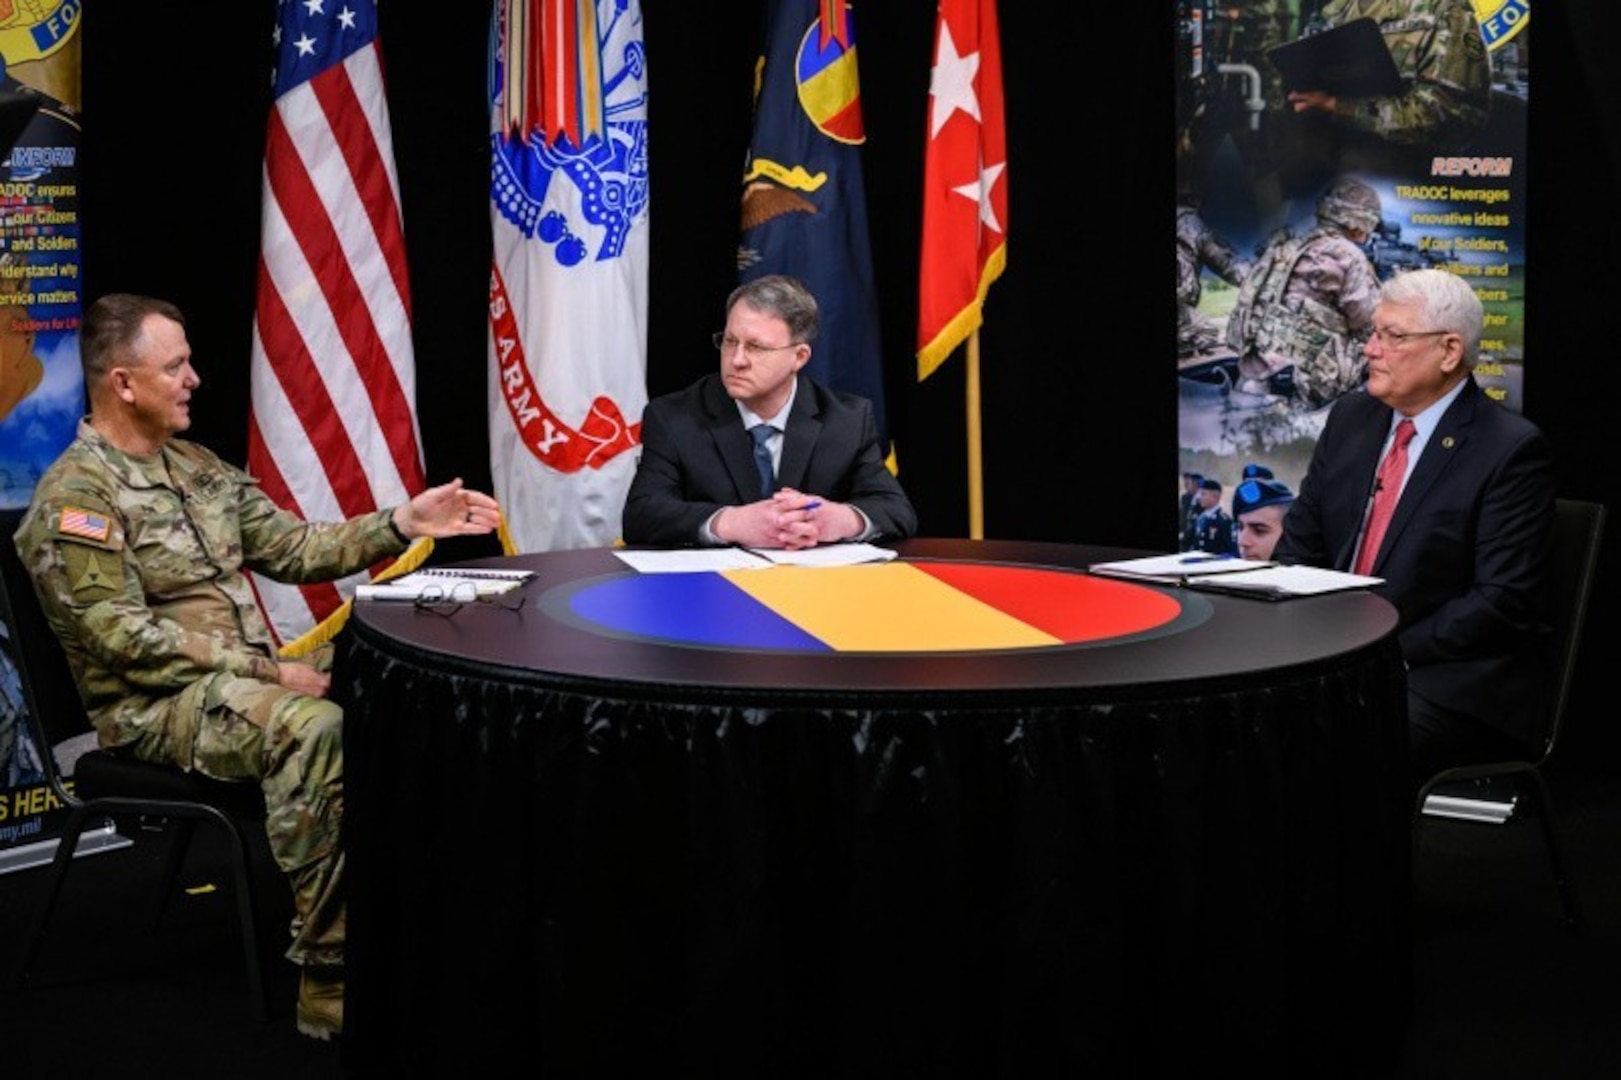 Gen. Paul E. Funk II, commanding general, U.S. Army Training and Doctrine Command (left), hosted retired Army Gen. Carter F. Ham, president and chief executive officer, Association of the United States Army (right), during a virtual leader professional development webinar, which was moderated by James Hoeft, TRADOC command information chief, that took place at Joint Base Langley-Eustic, Virginia, Jan. 13, 2021.